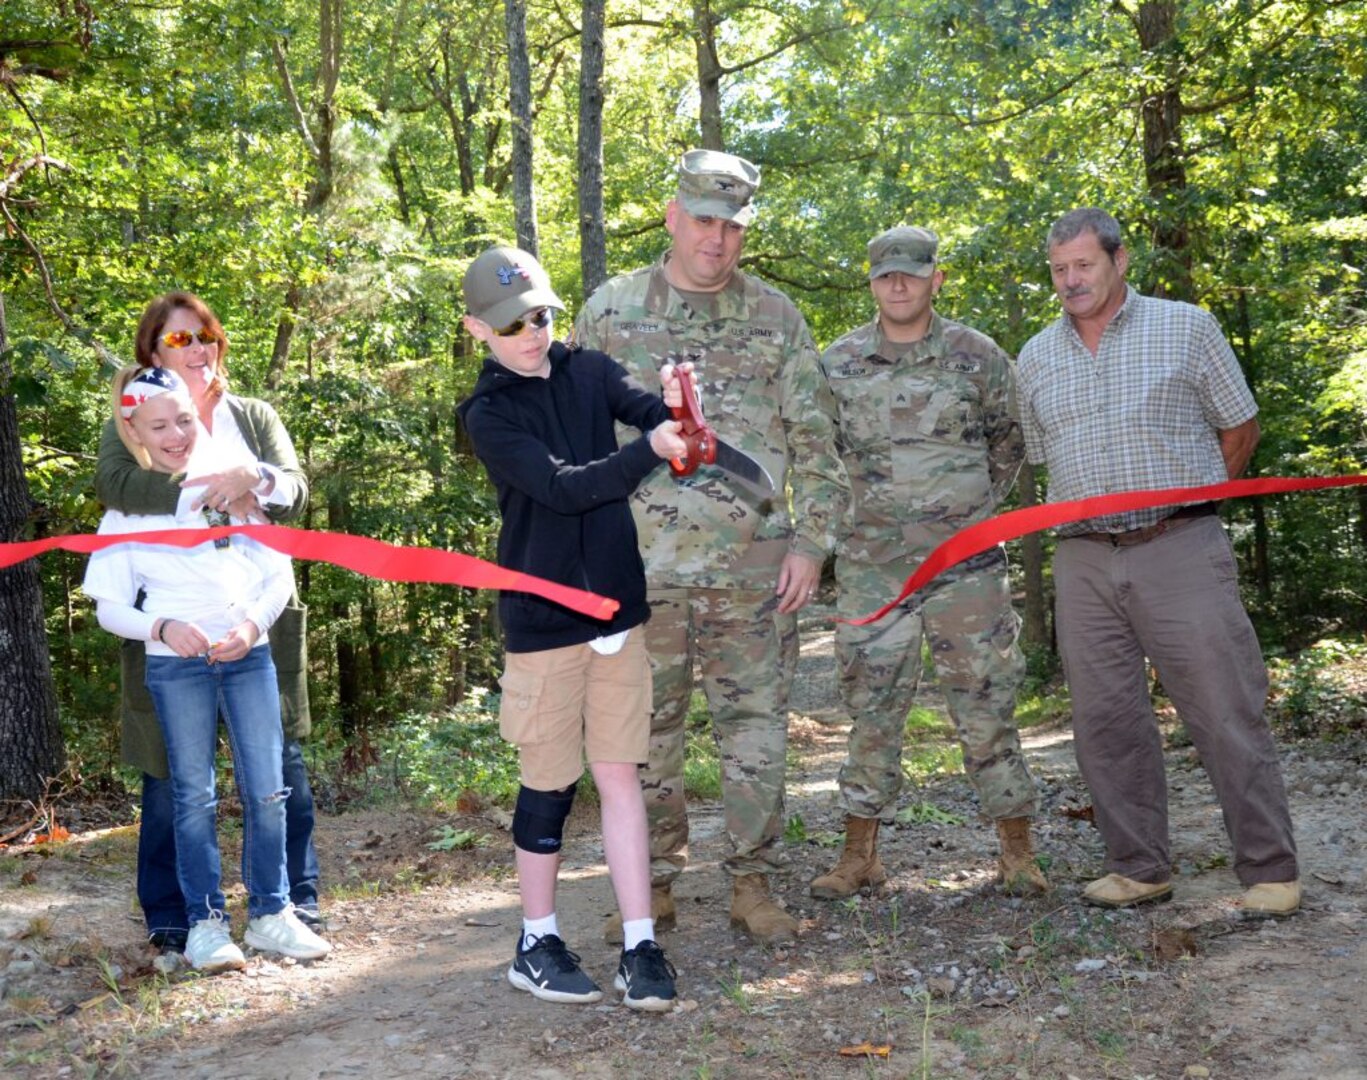 Ault Obstacle Course dedicated in name of VNG Soldier killed in Iraq